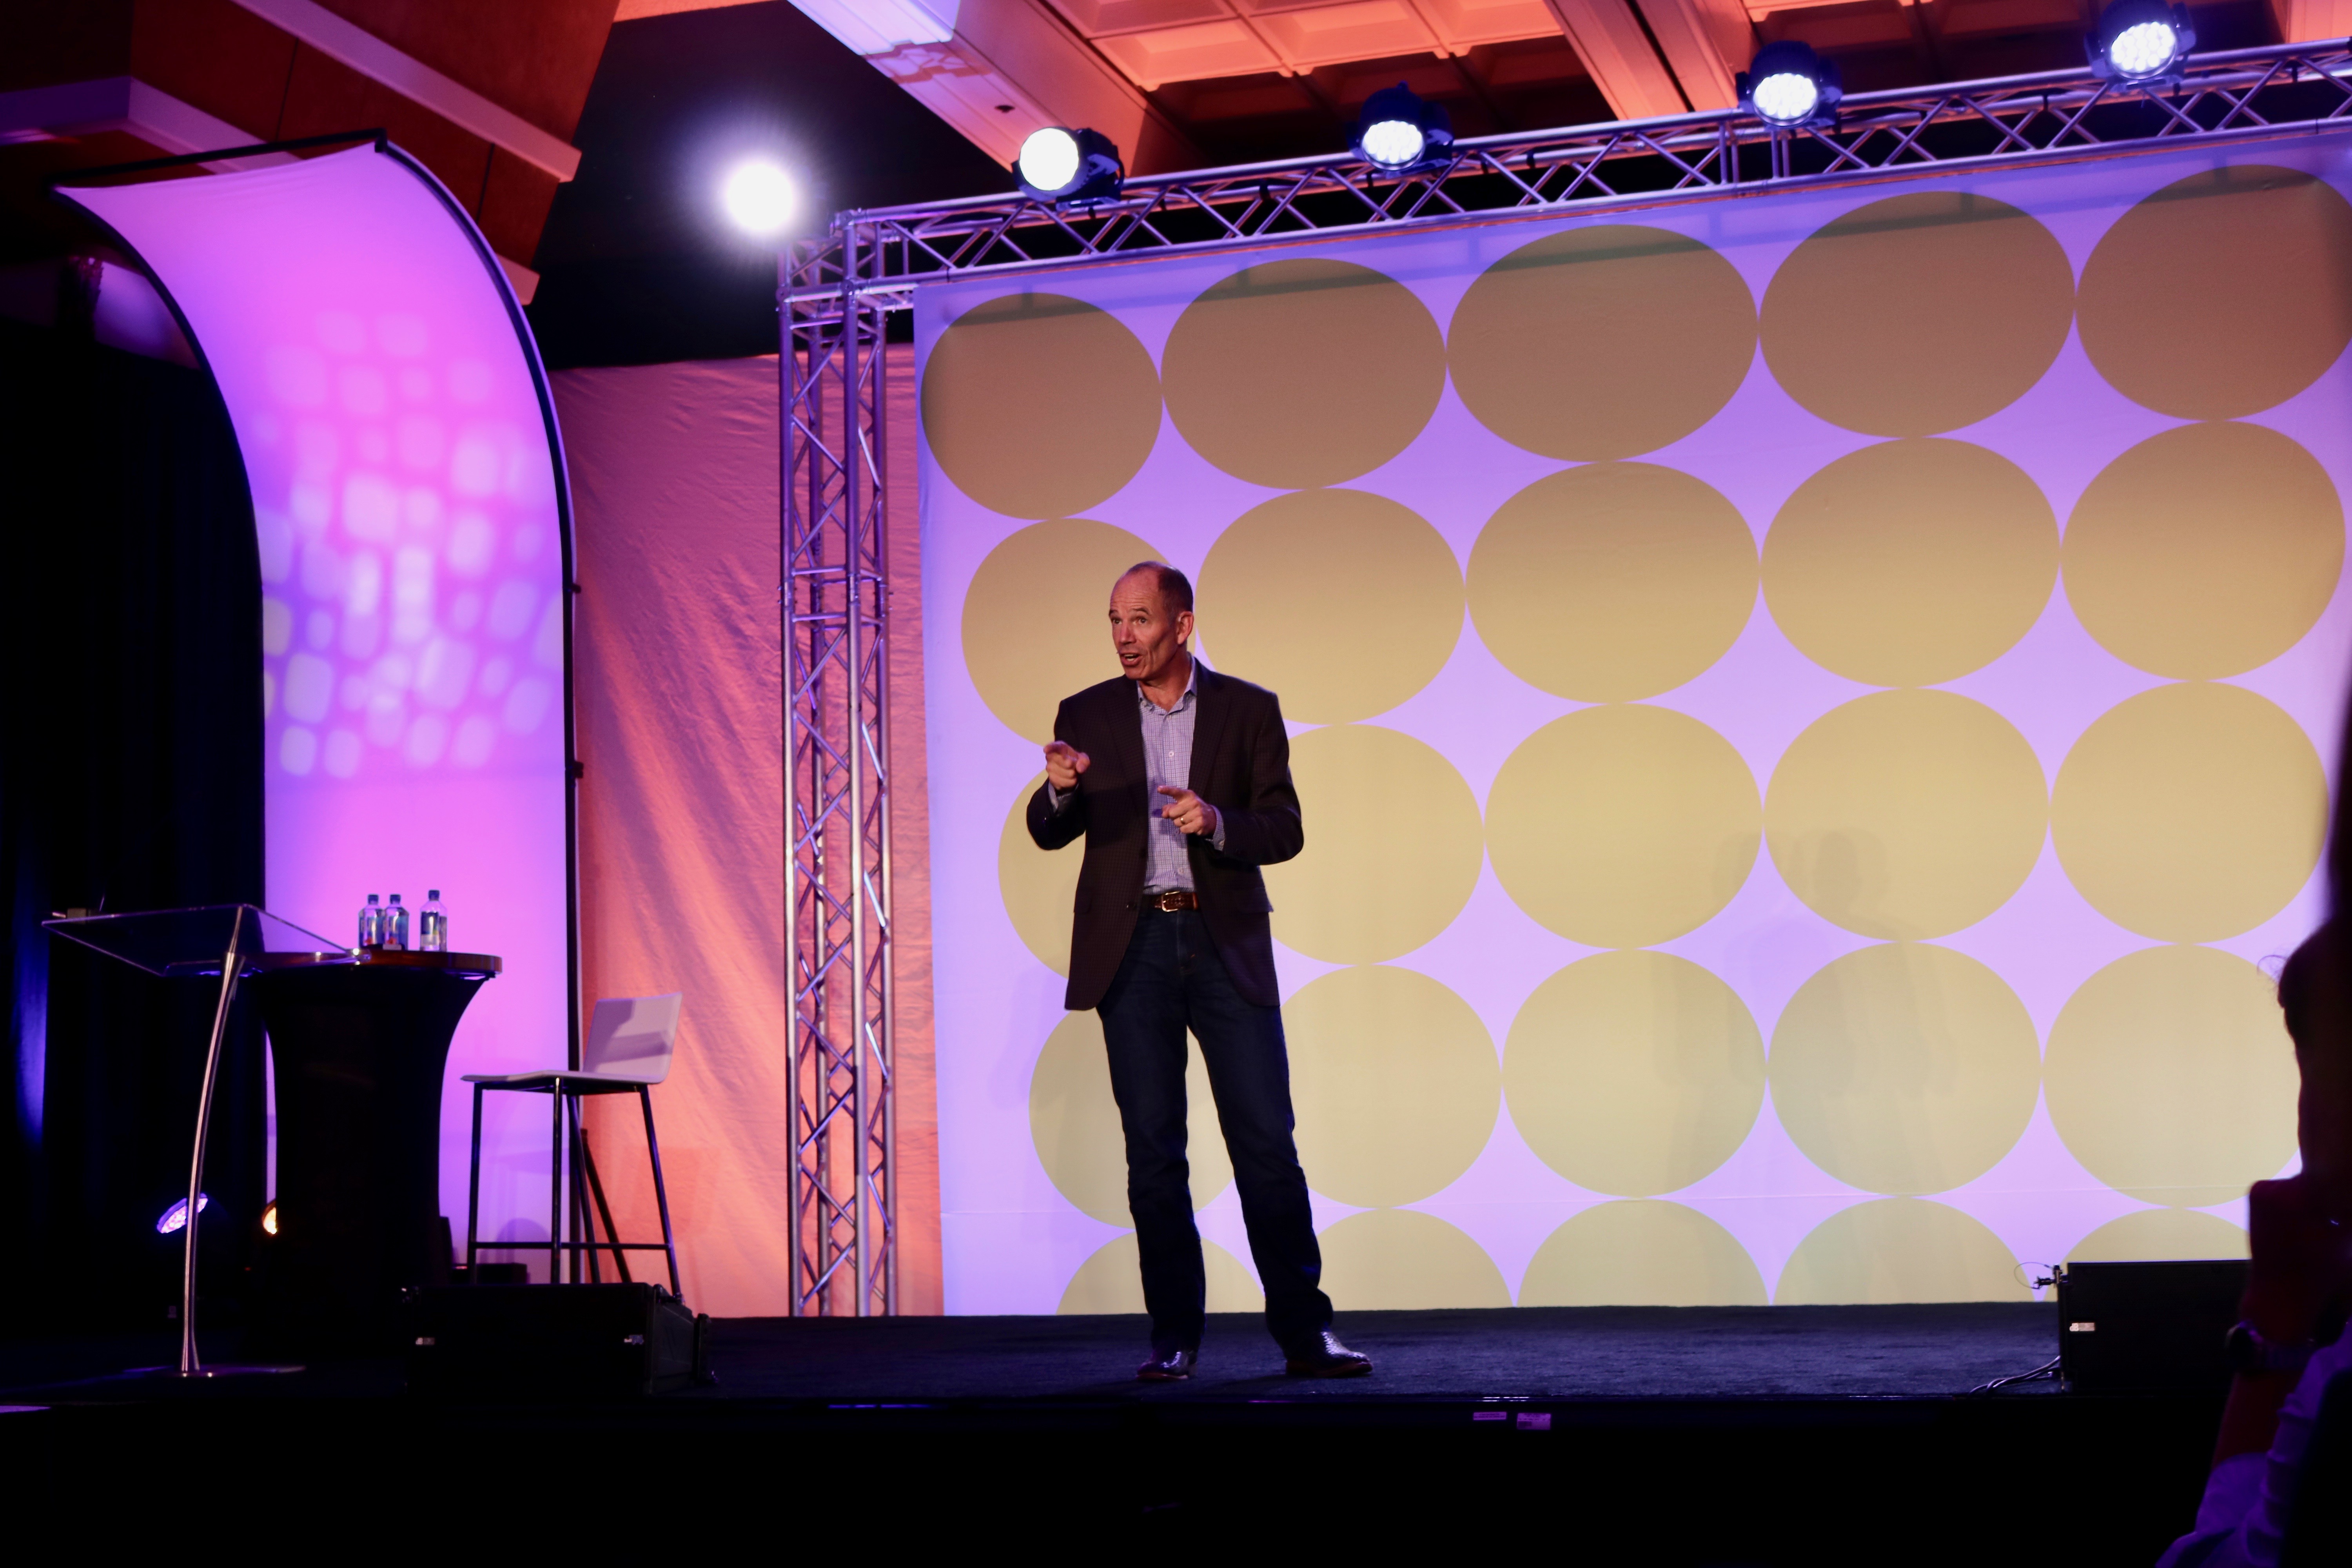 Marc Randolph, the Co- Founder of Netflix, speaking on the main stage at ONTRApalooza 2016.